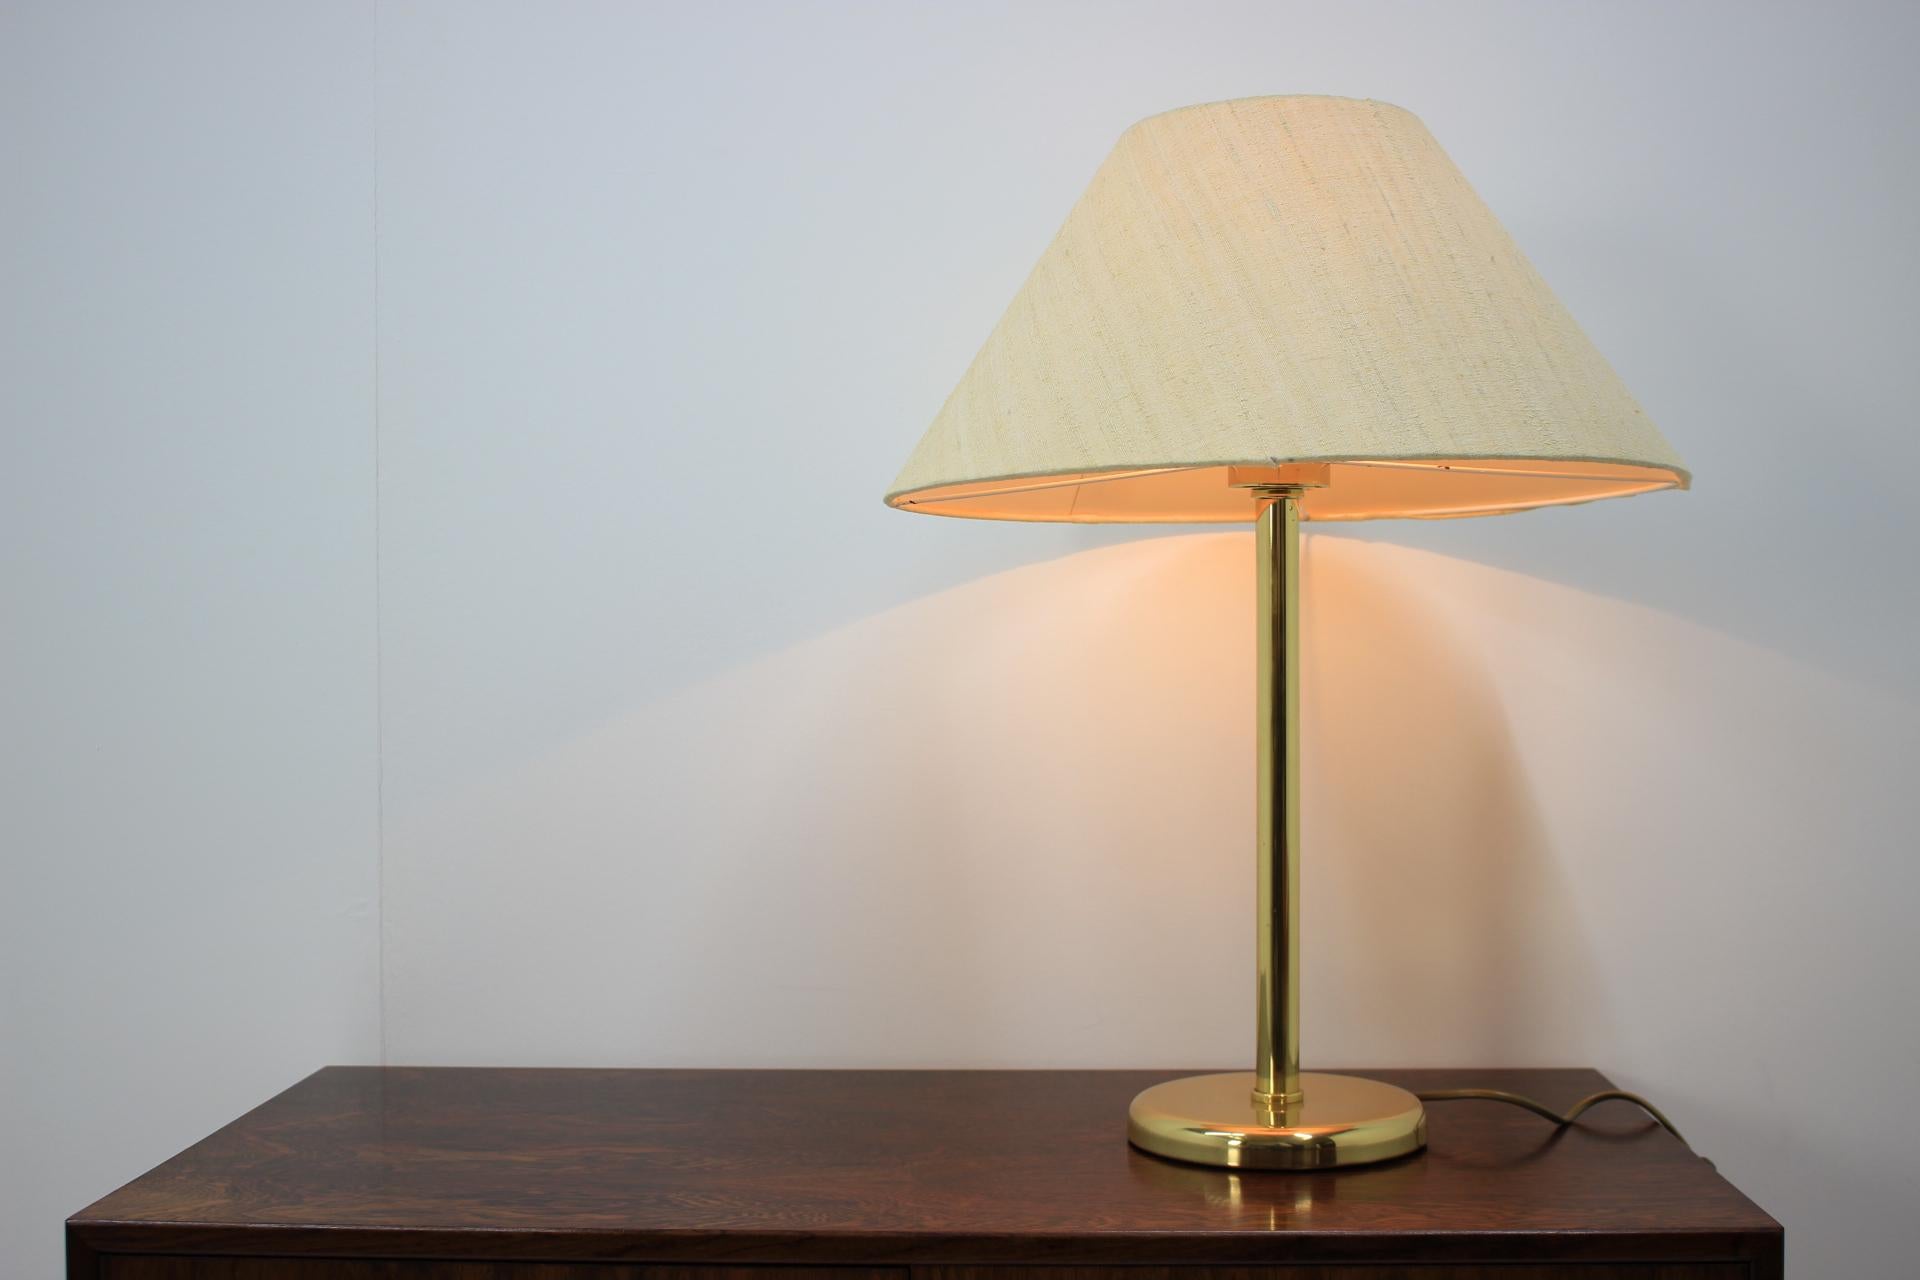 - Brass, textile lampshade
- Made in Germany
- Original fully functional condition.